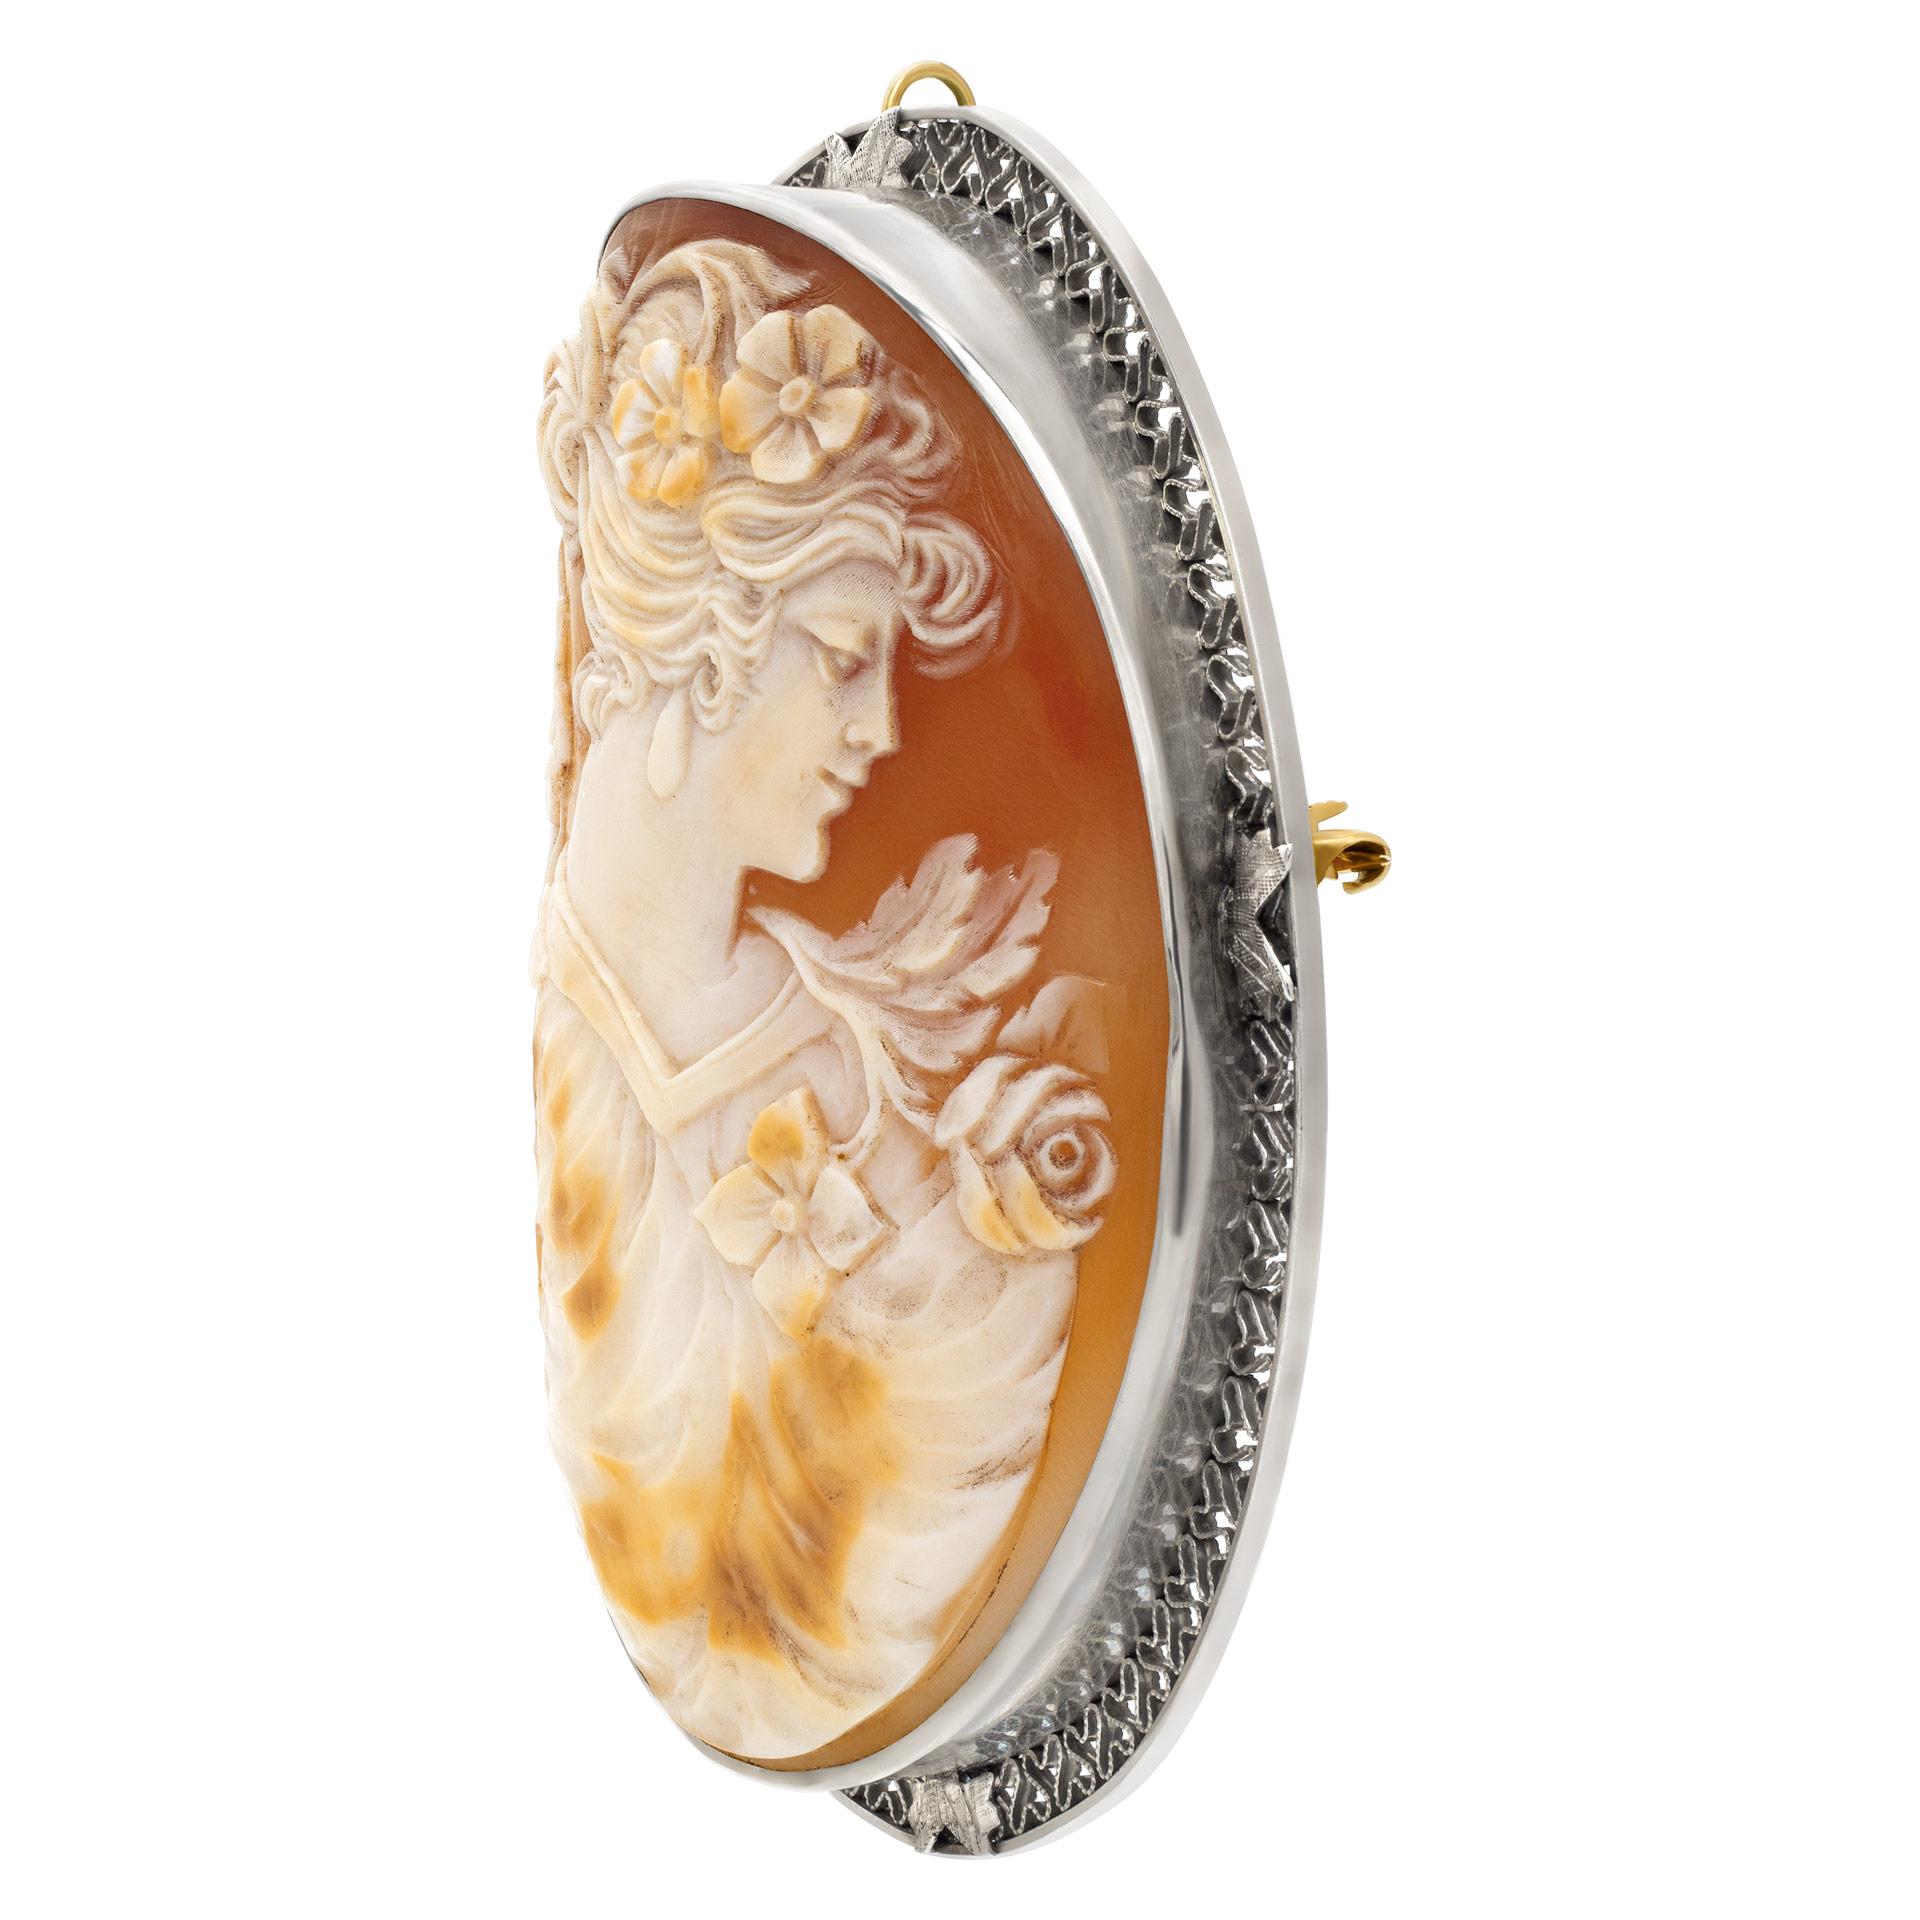 Cameo broach in 14k white gold with intricate design. Measurments: 2.6